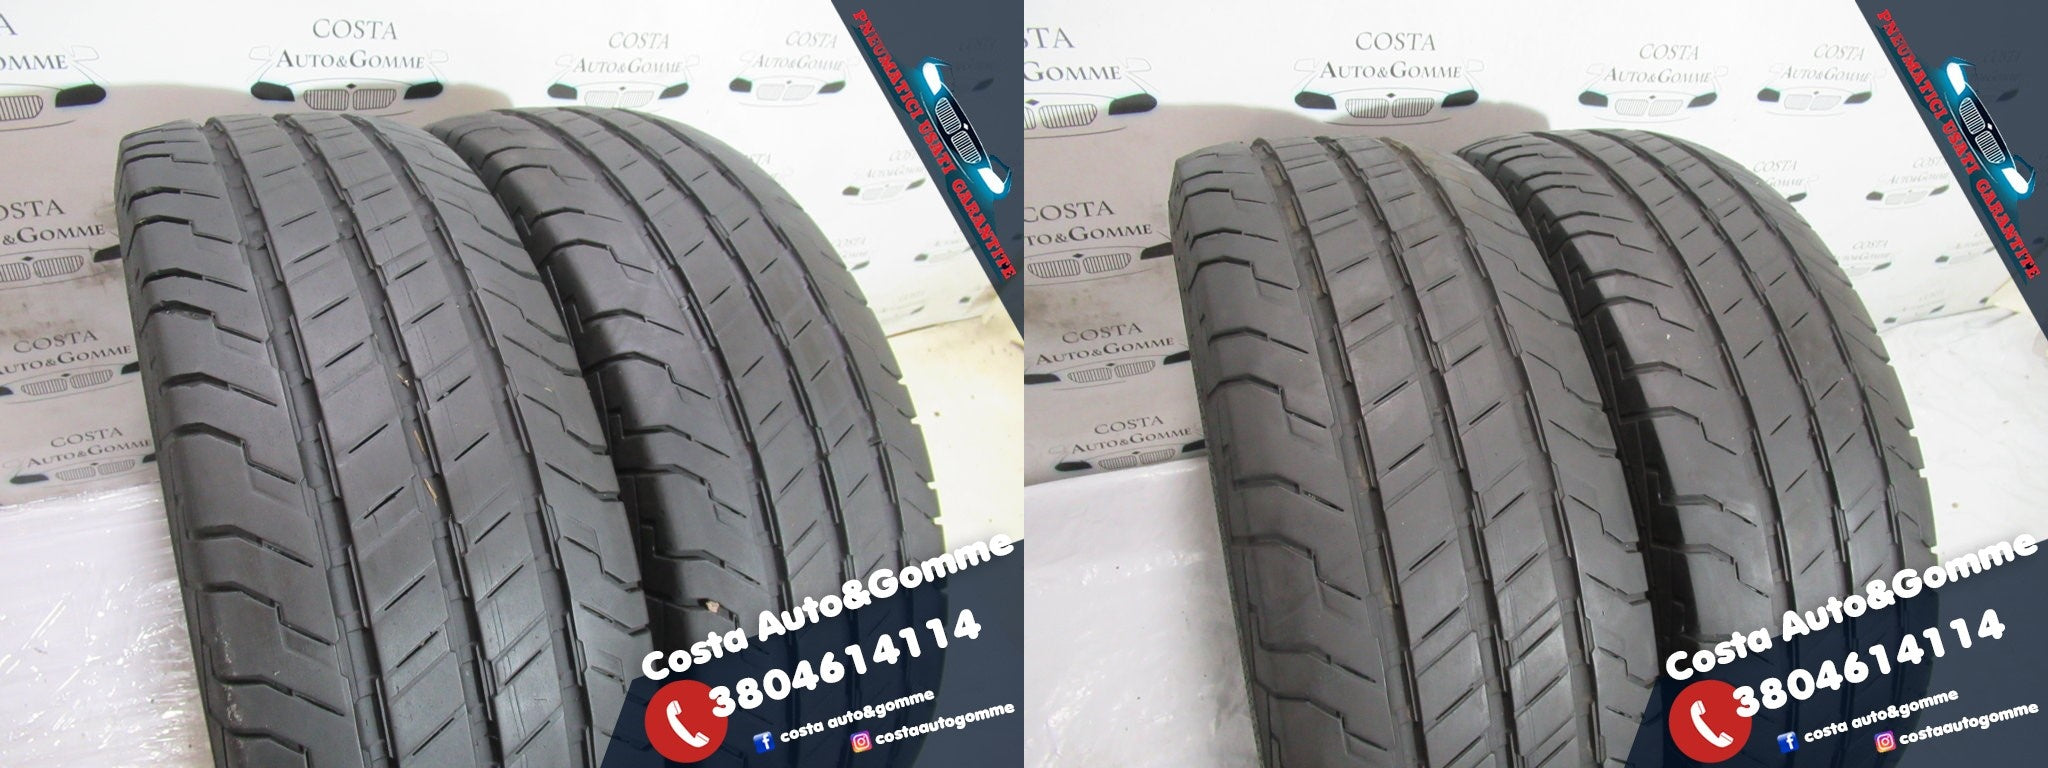 215 70 15c Continental 90% 2021 215 70 R15 4 Gomme